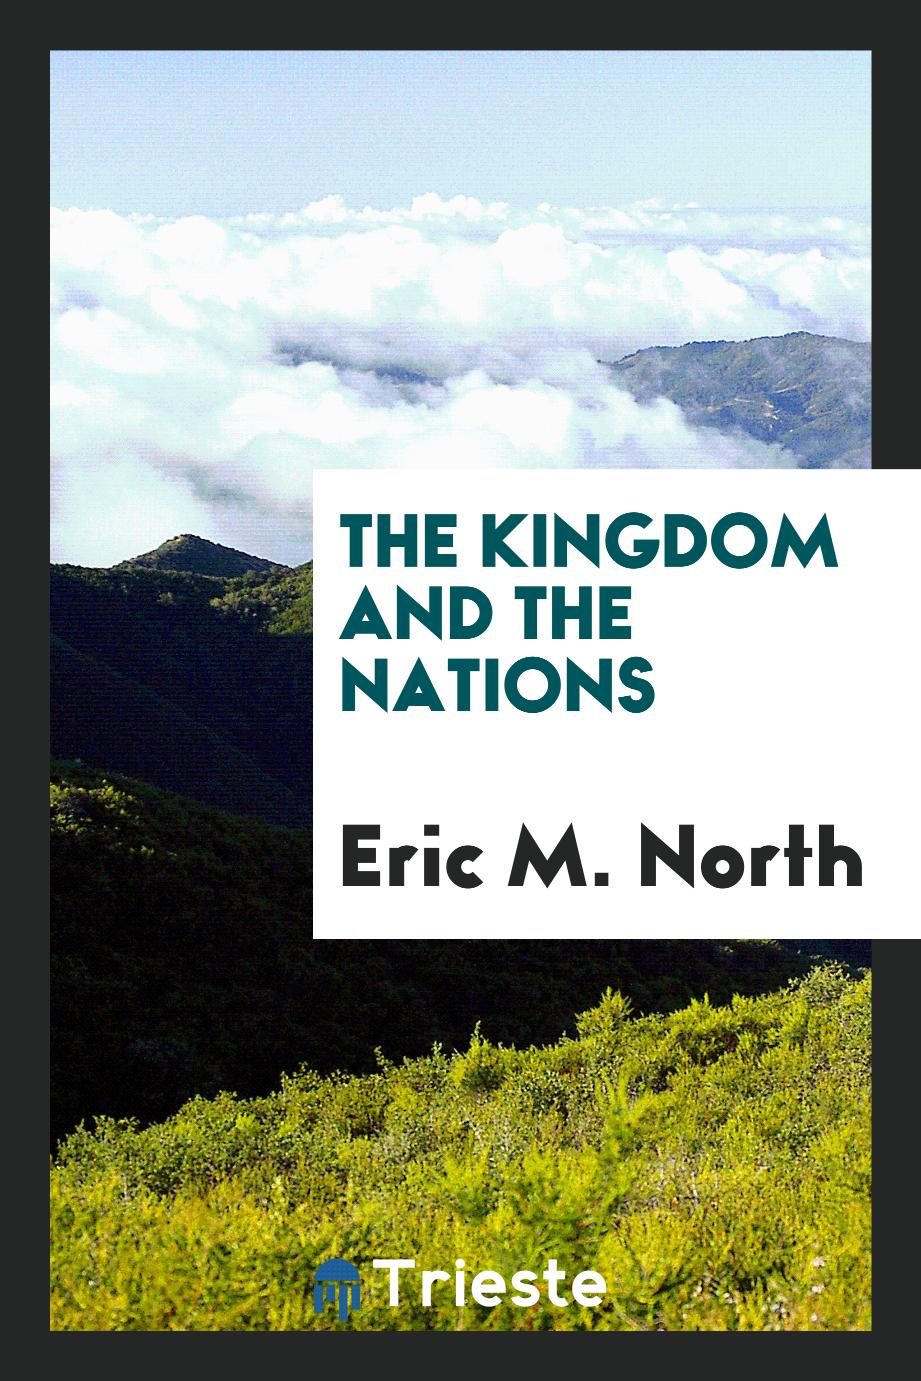 The kingdom and the nations